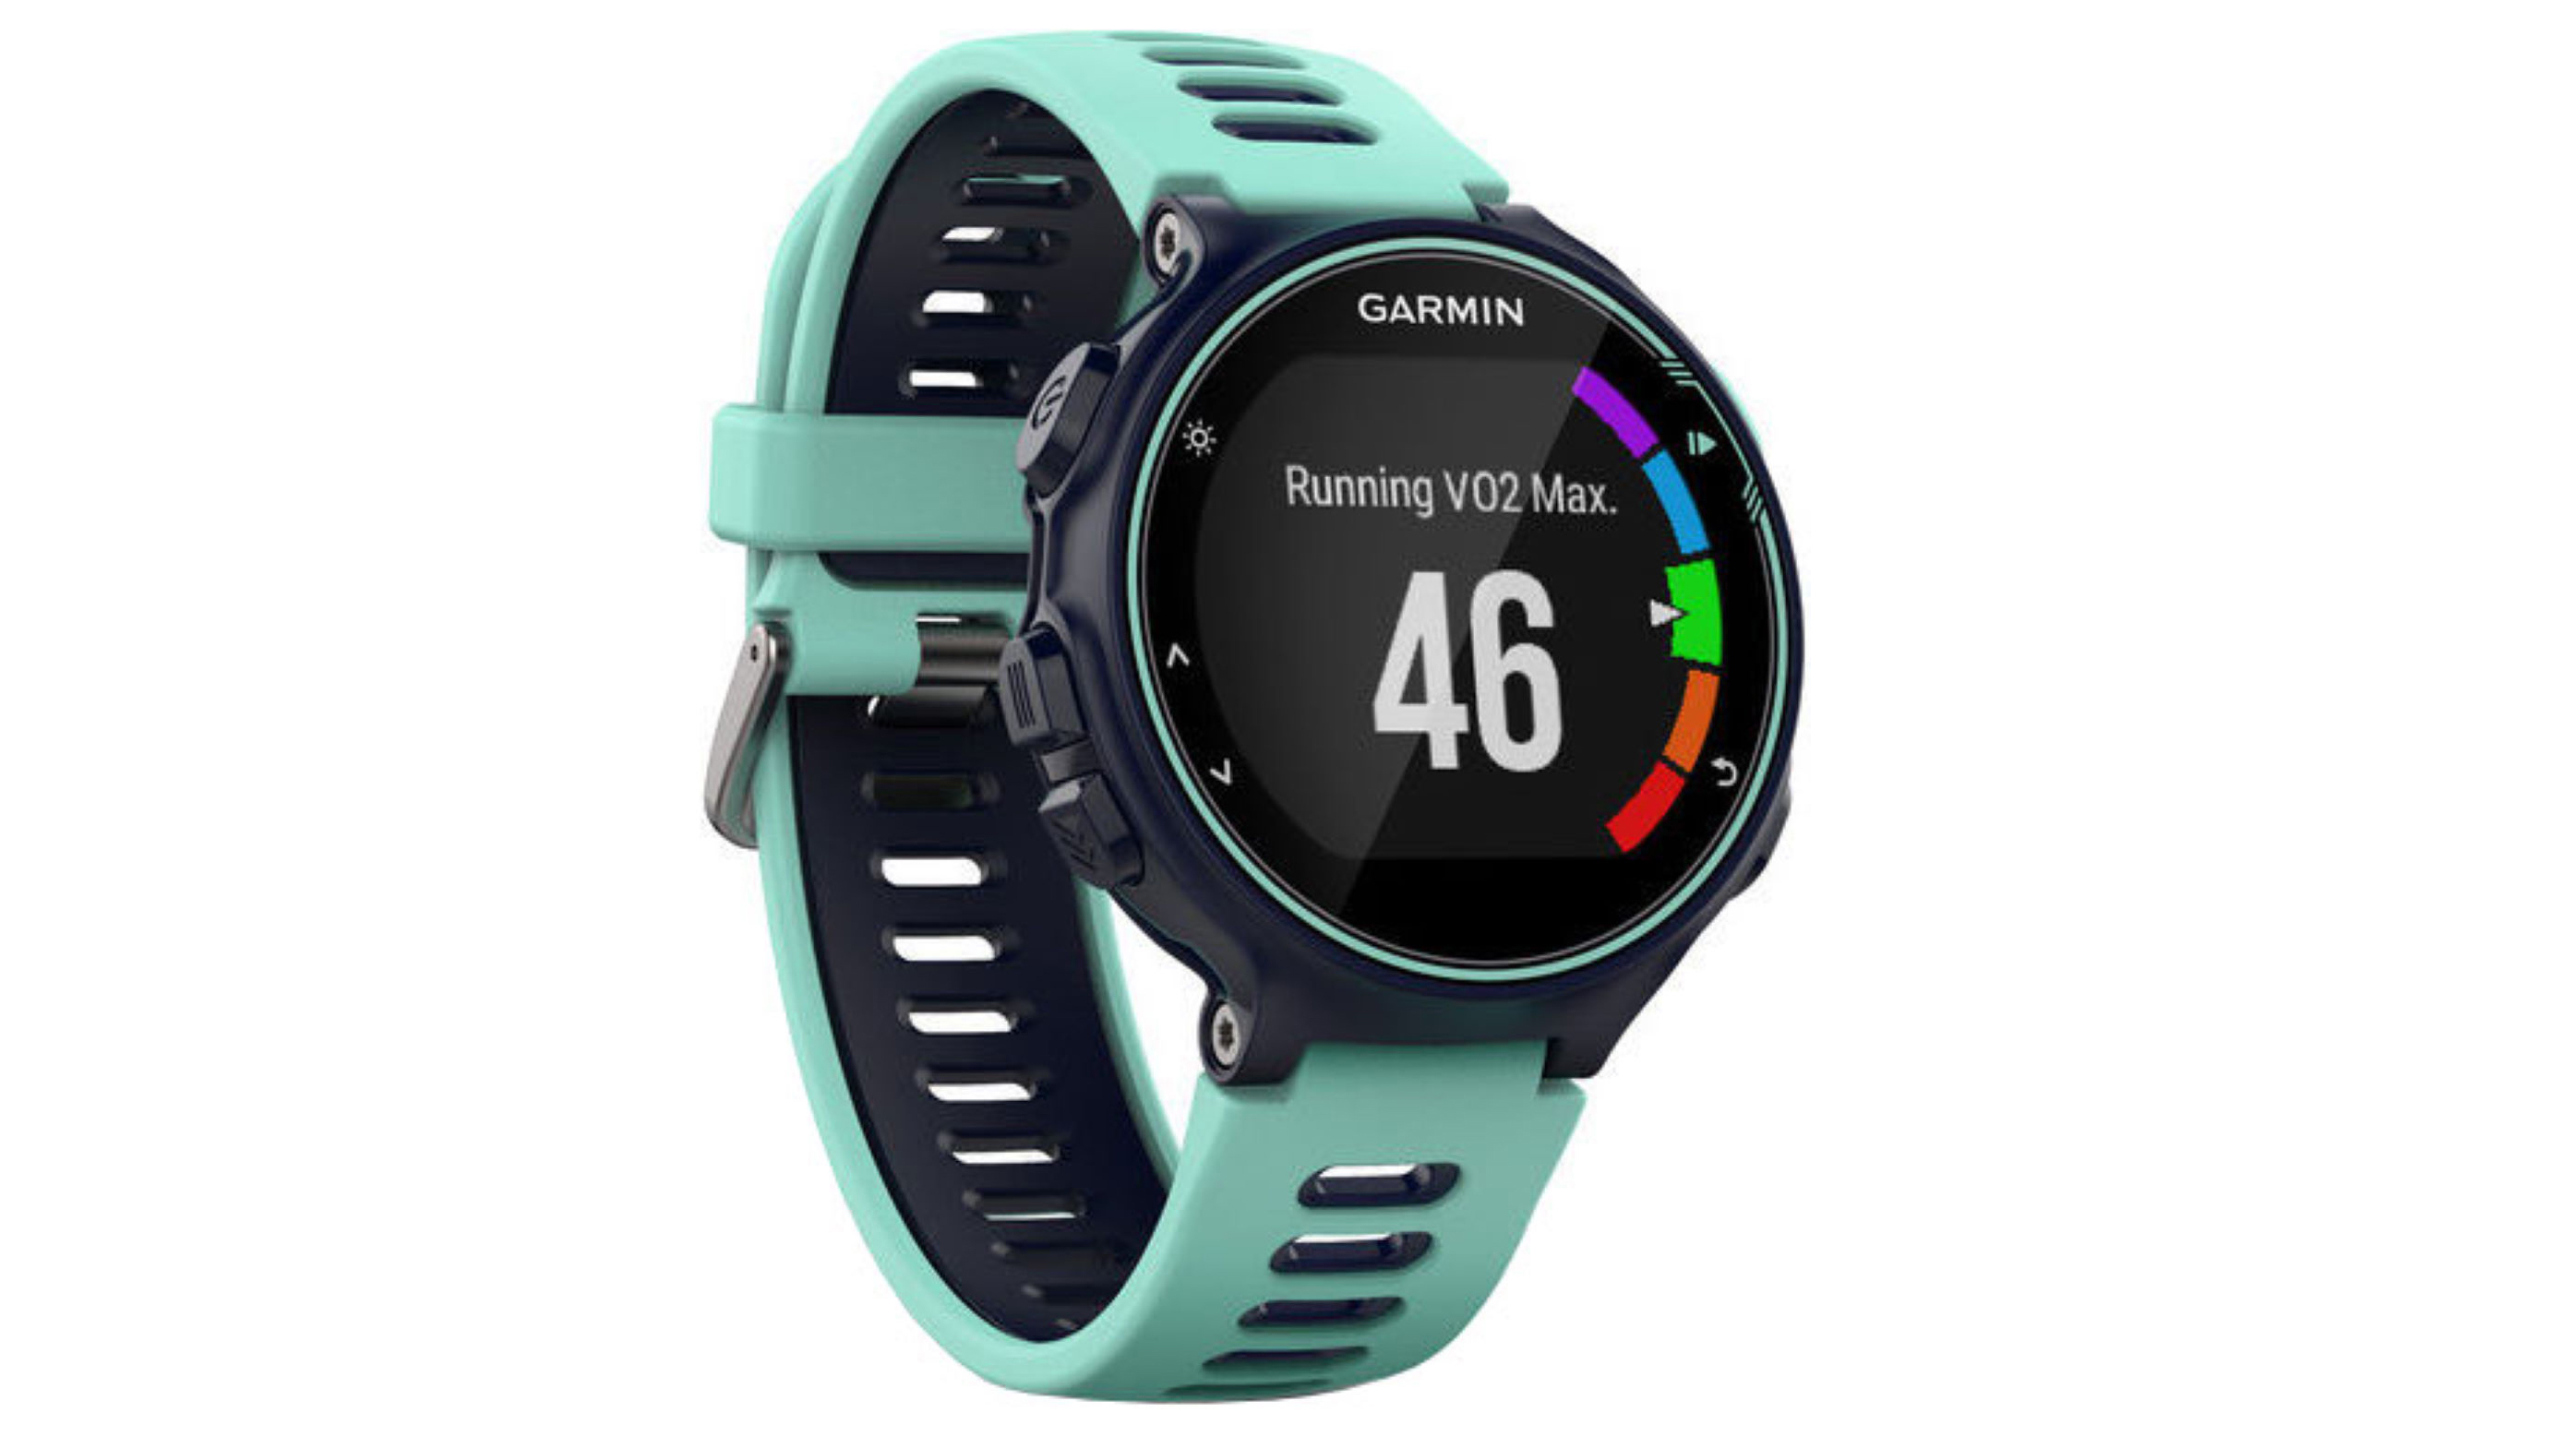 Should you buy the Garmin Forerunner 735XT multisport and running watch on Amazon |